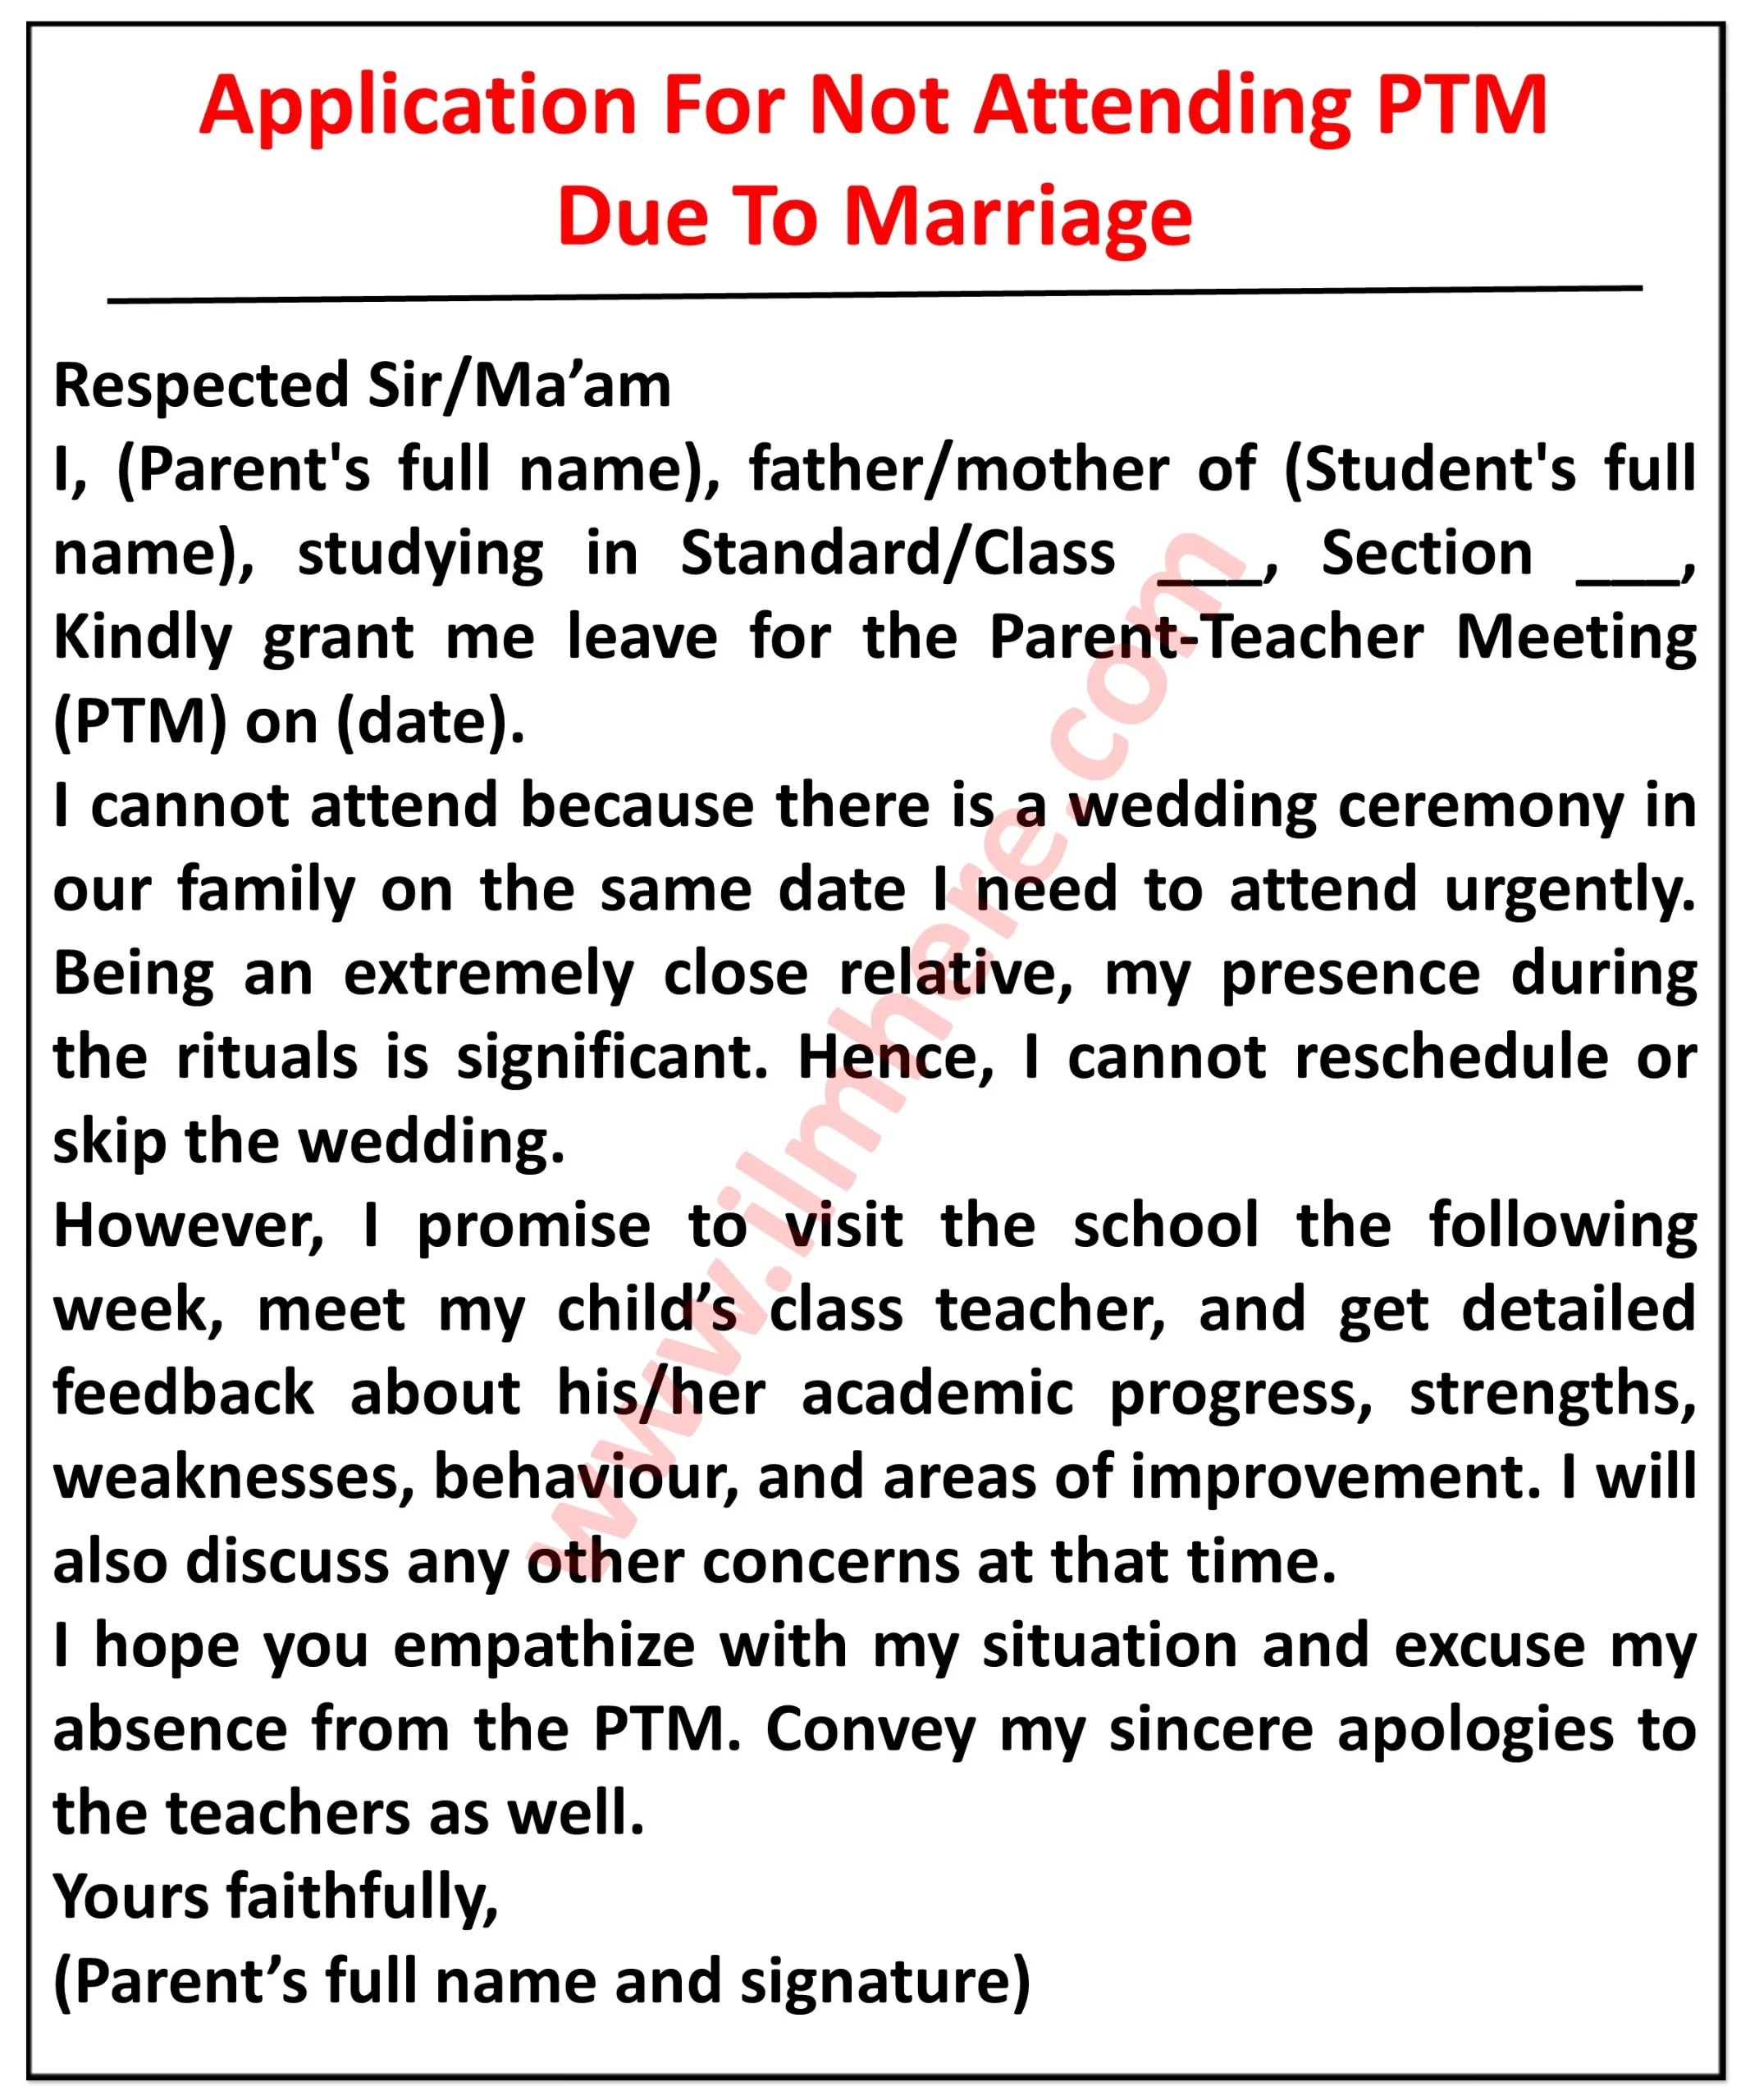  It appears to be an application for leave of absence from a parent-teacher meeting (PTM) due to a wedding in the family.Here are the details I can see in the image: Top section: It reads "Application For Not Attending PTM Due To Marriage" in bold letters. Body: It starts with "Respected Sir/Ma'am," followed by an apology for the absence due to a family wedding. The applicant mentions that there is a wedding ceremony in their family on the same date as the PTM, "[date]". They emphasize that it is a significant event for a close relative and their presence is mandatory. Student information: The applicant mentions their child's name, "[Student's full name]". They mention their child's class details - "[Standard/Class] [Section]". Alternative request: The applicant assures the school that they will visit the school the following week, during "the week commencing [date]", to meet with their child's class teacher. They express their desire to discuss their child's academic progress, strengths, weaknesses, behavior, and areas of improvement. They are also willing to discuss any other concerns at that time. Closing: The applicant hopes for understanding and apologizes for any inconvenience caused by their absence. They request the school to convey their apologies to the teachers as well. Finally, they sign the application with their full name and signature. Overall, the application politely informs the school about the parent's inability to attend the PTM due to a family wedding and proposes an alternative meeting with the teachers the following week to discuss their child's academic progress.